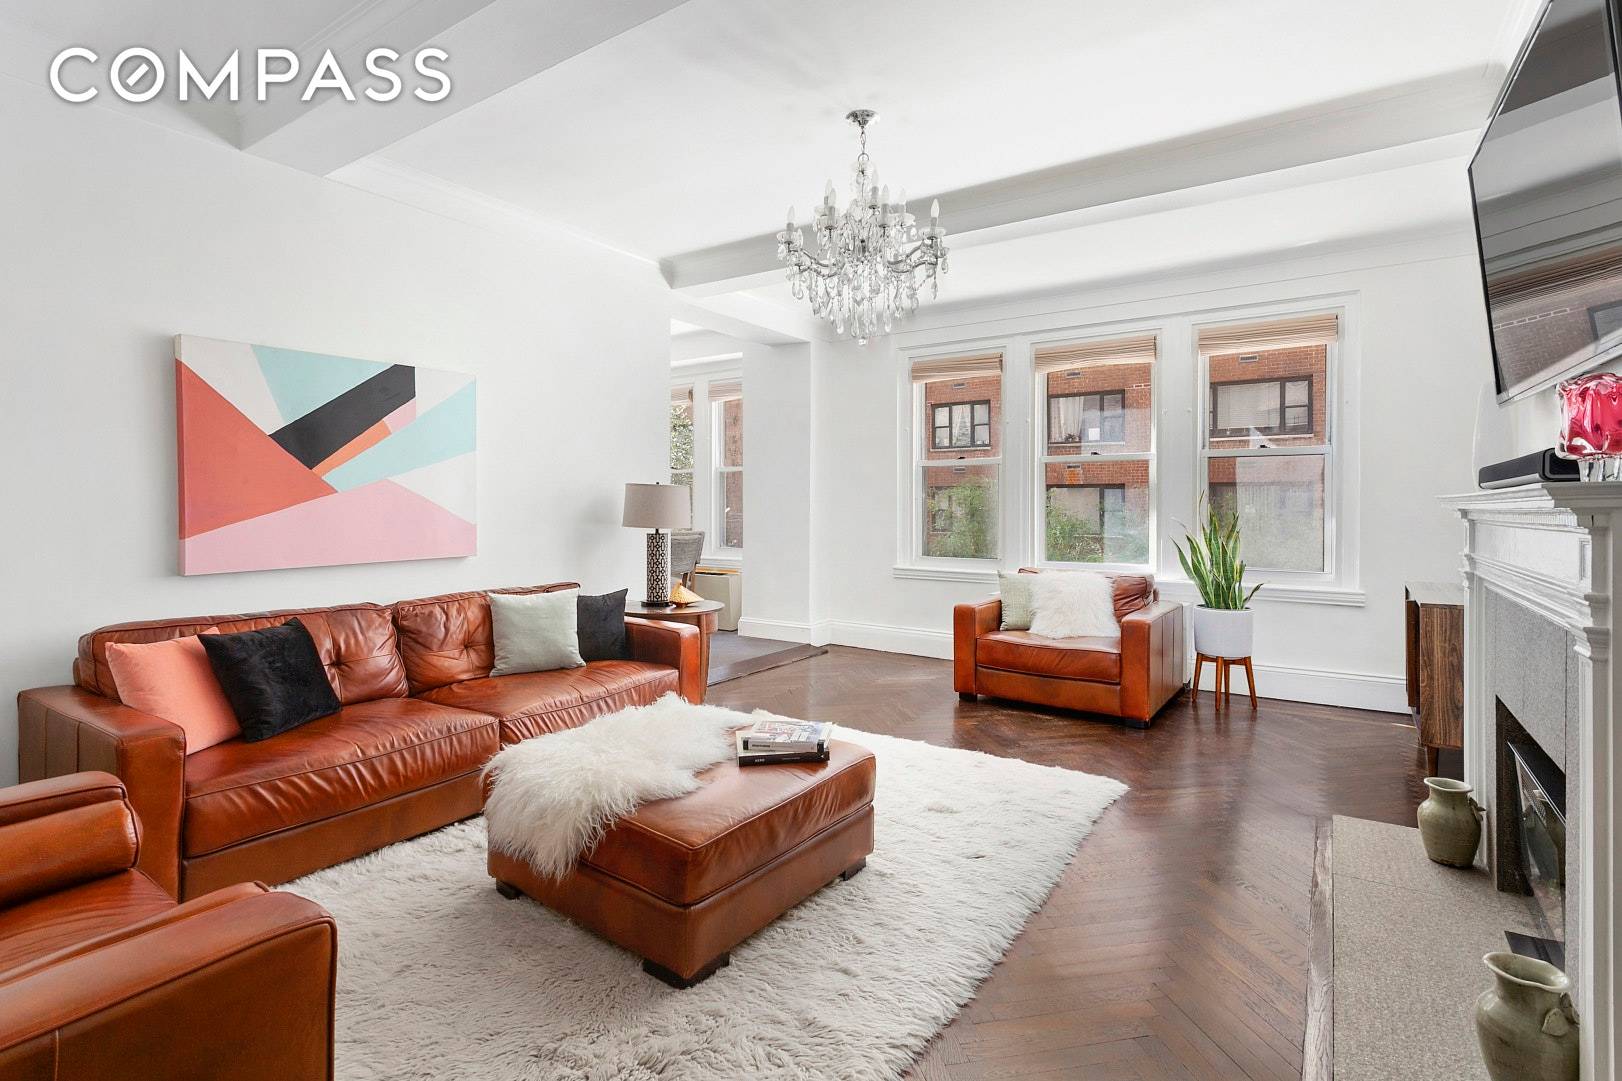 Sprawling and impeccably renovated pre war one bedroom plus windowed home office den in an architecturally significant full service cooperative steps from prestigious Sutton Place.